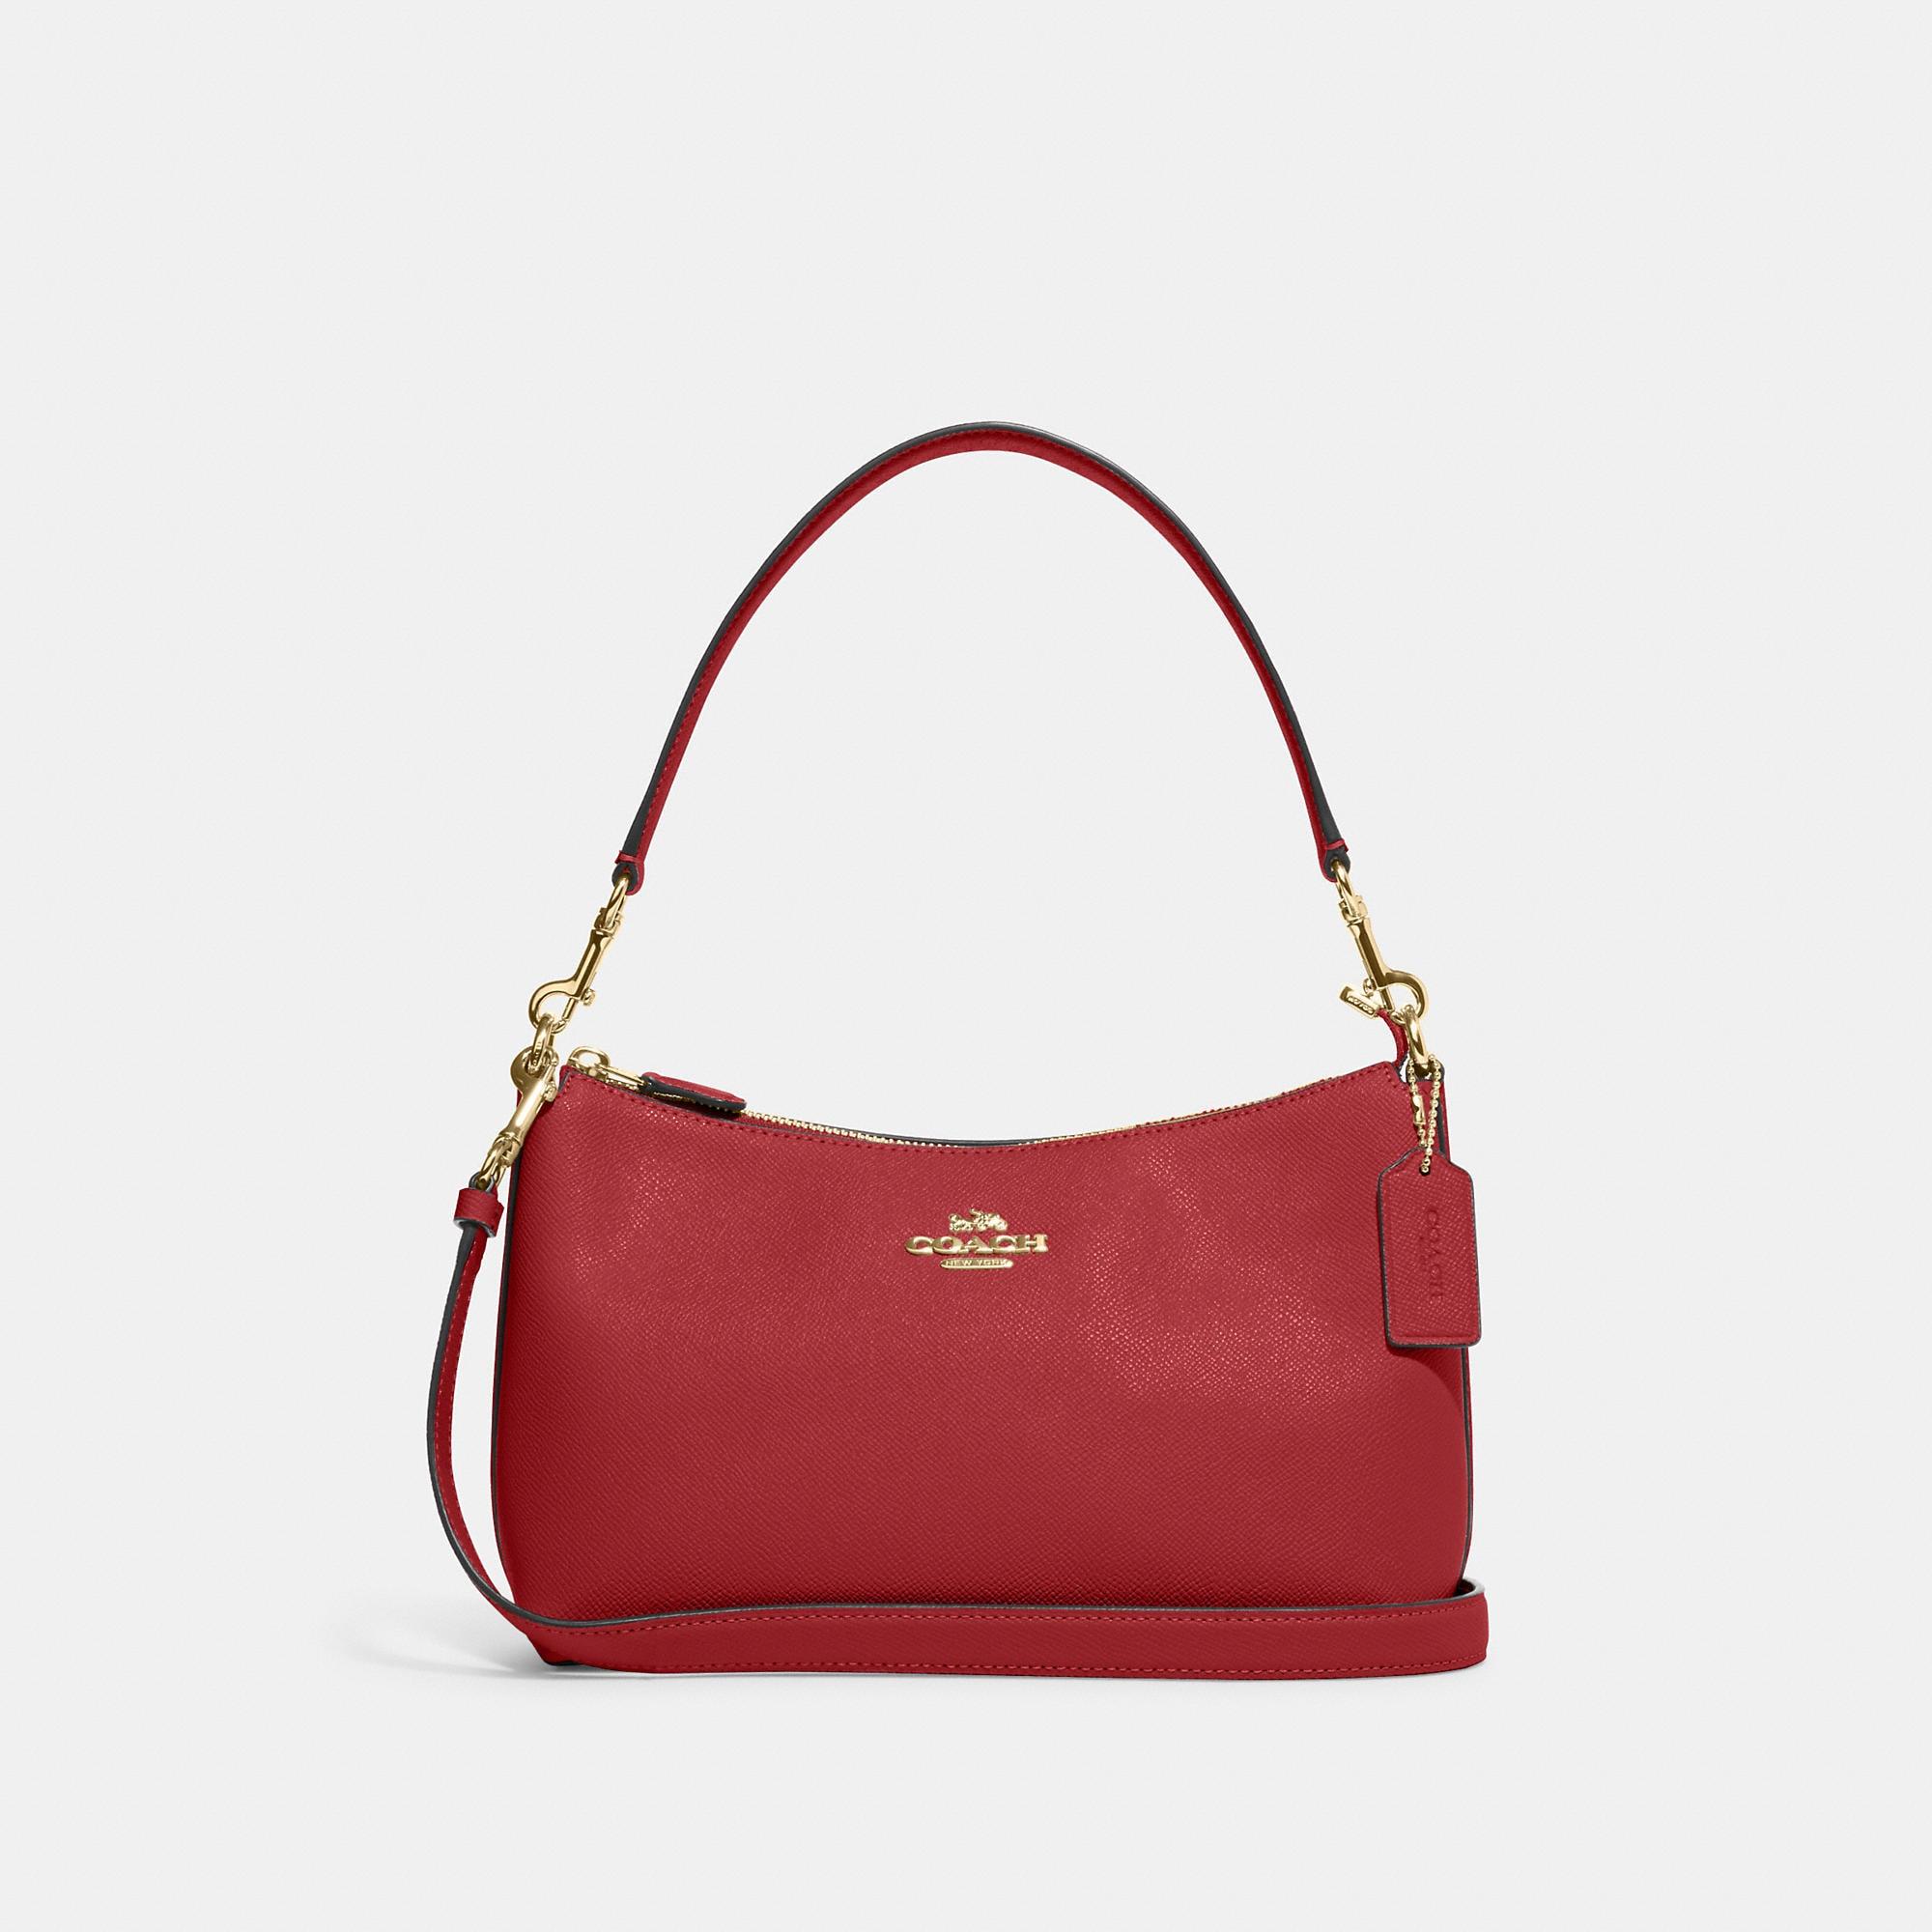 Coach's Valentine's Day Drop Has Deals Up to 75% Off Bags & More